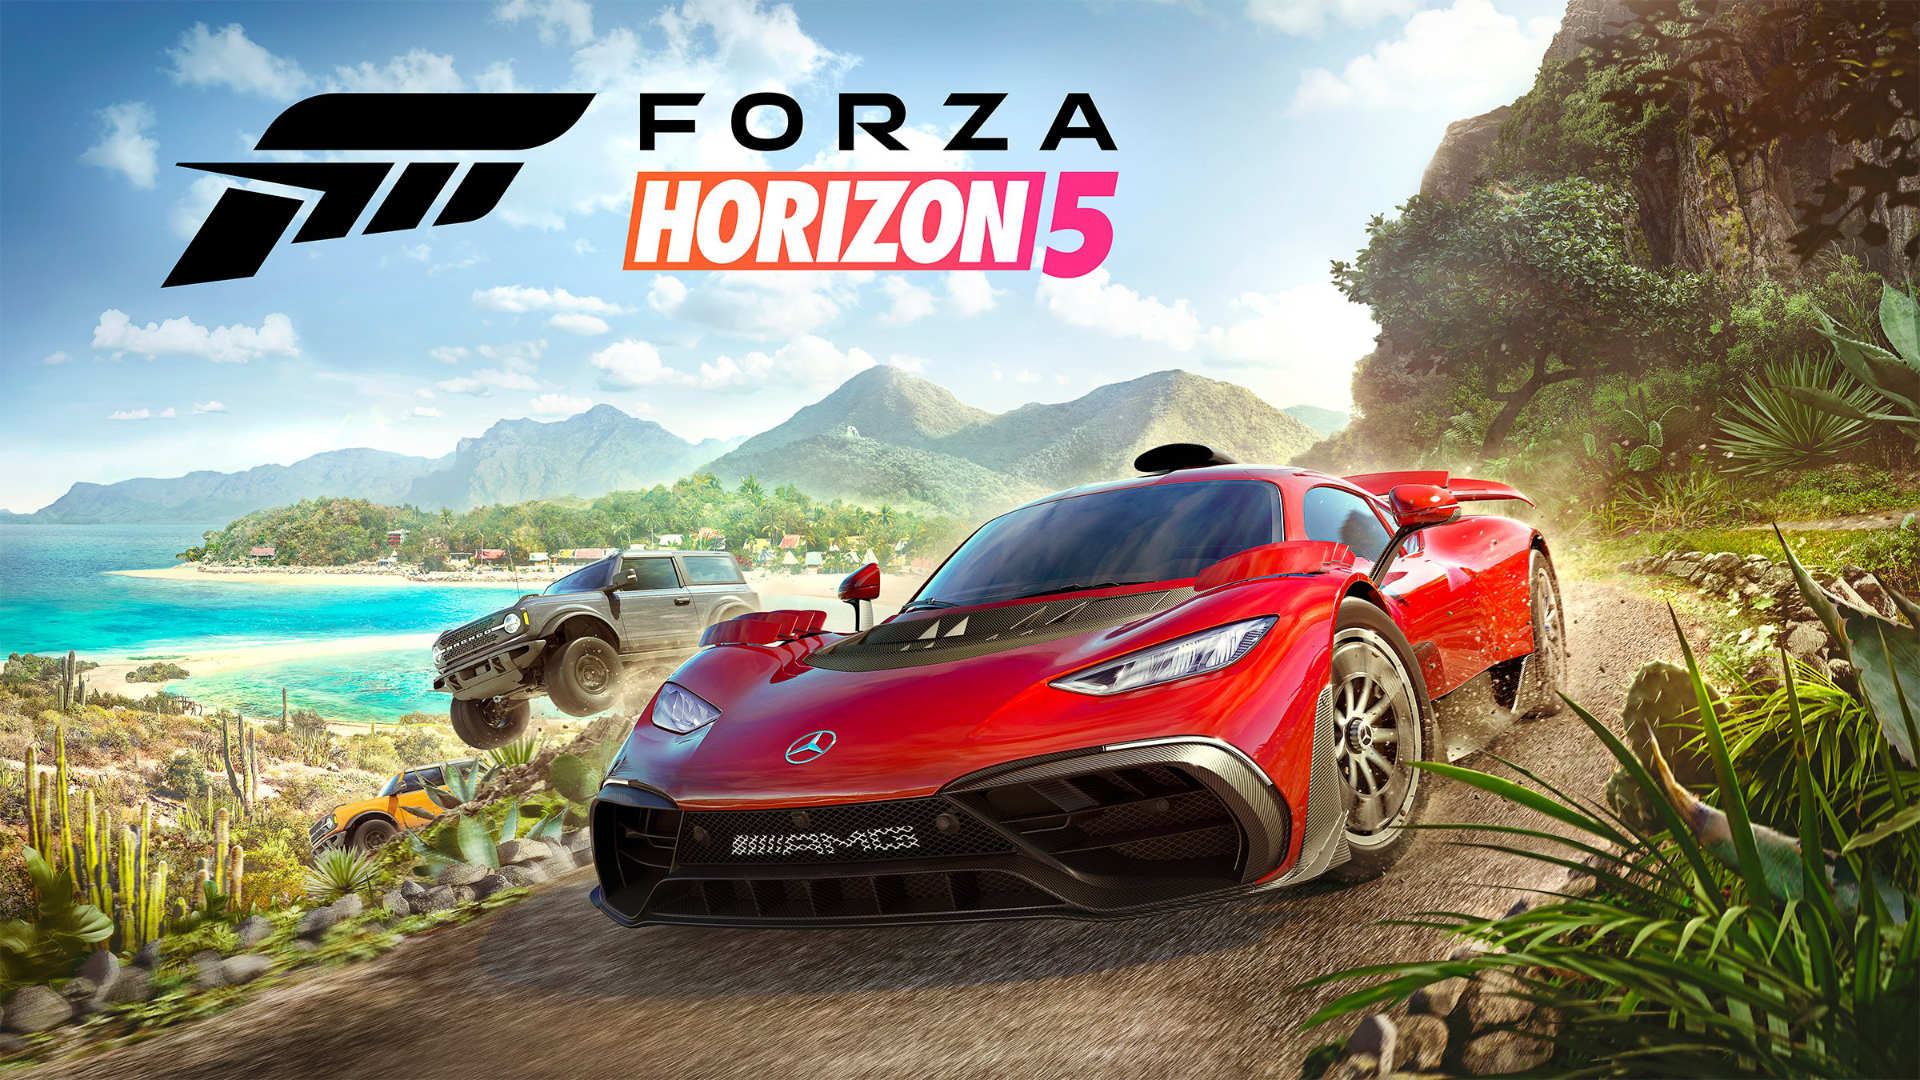 Forza Horizon 5 Intro Gameplay and Cover Cars Revealed